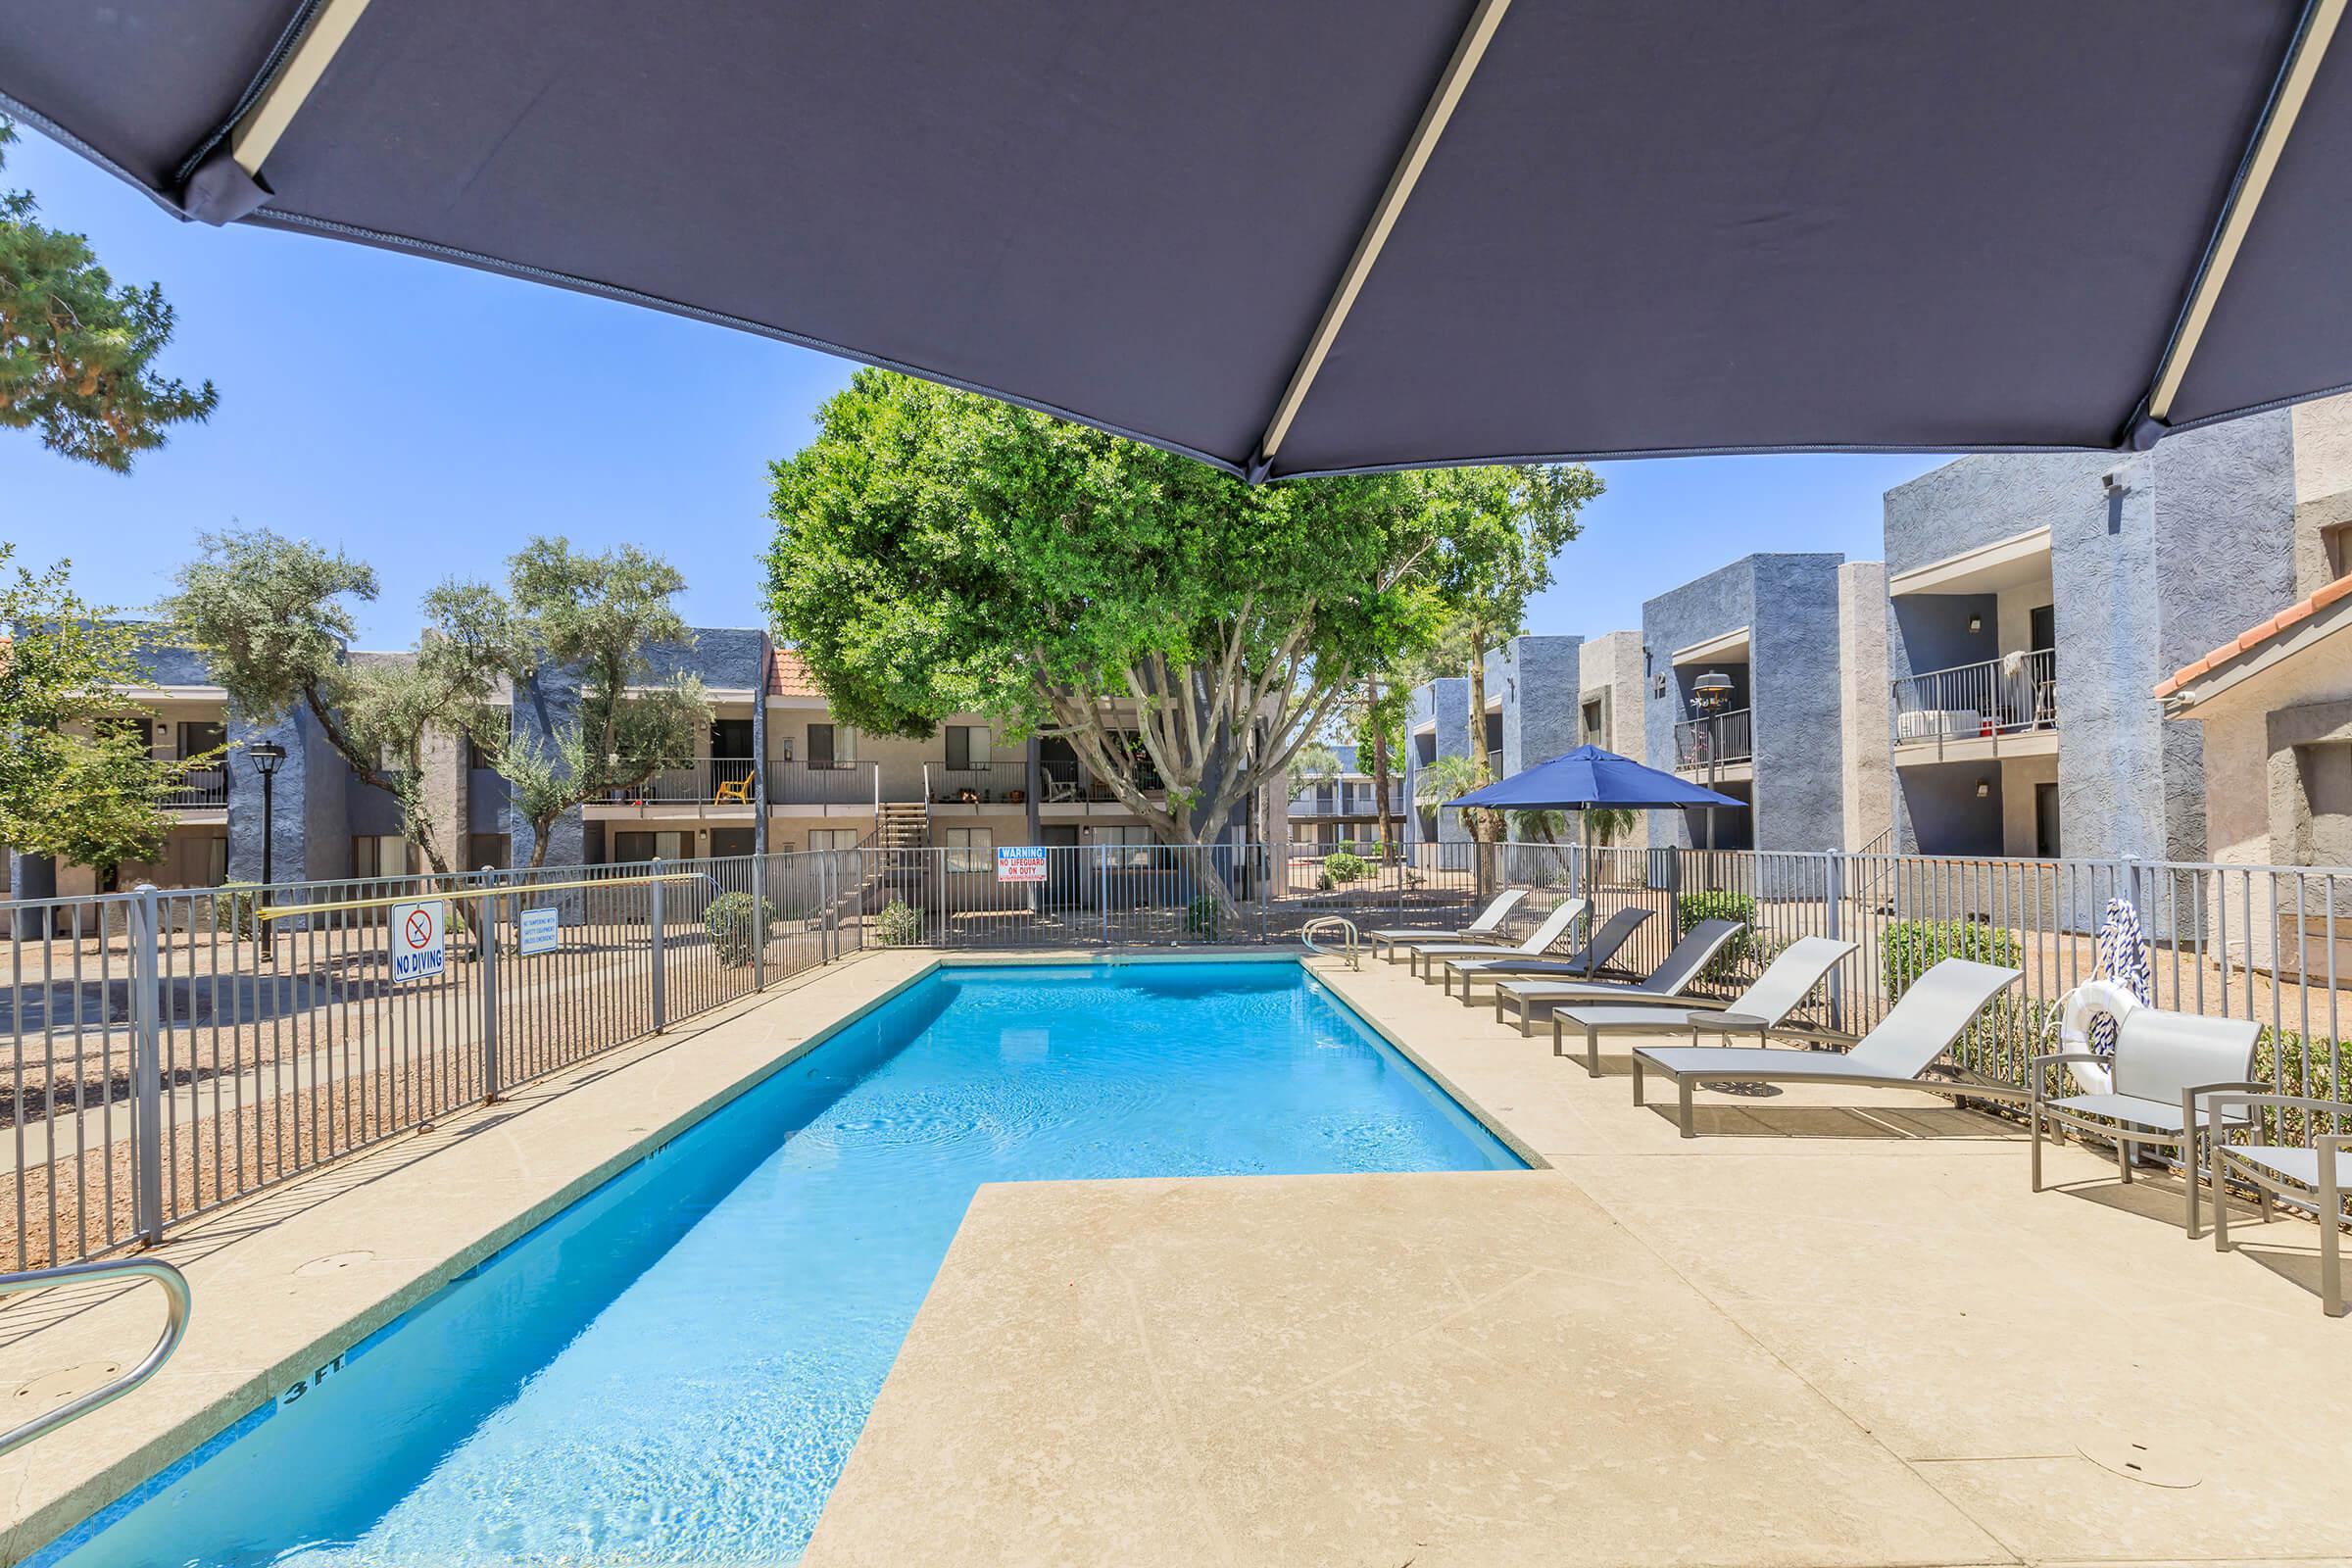 Outdoor swimming pool with built in lap station and pool deck chairs at Rise Desert West